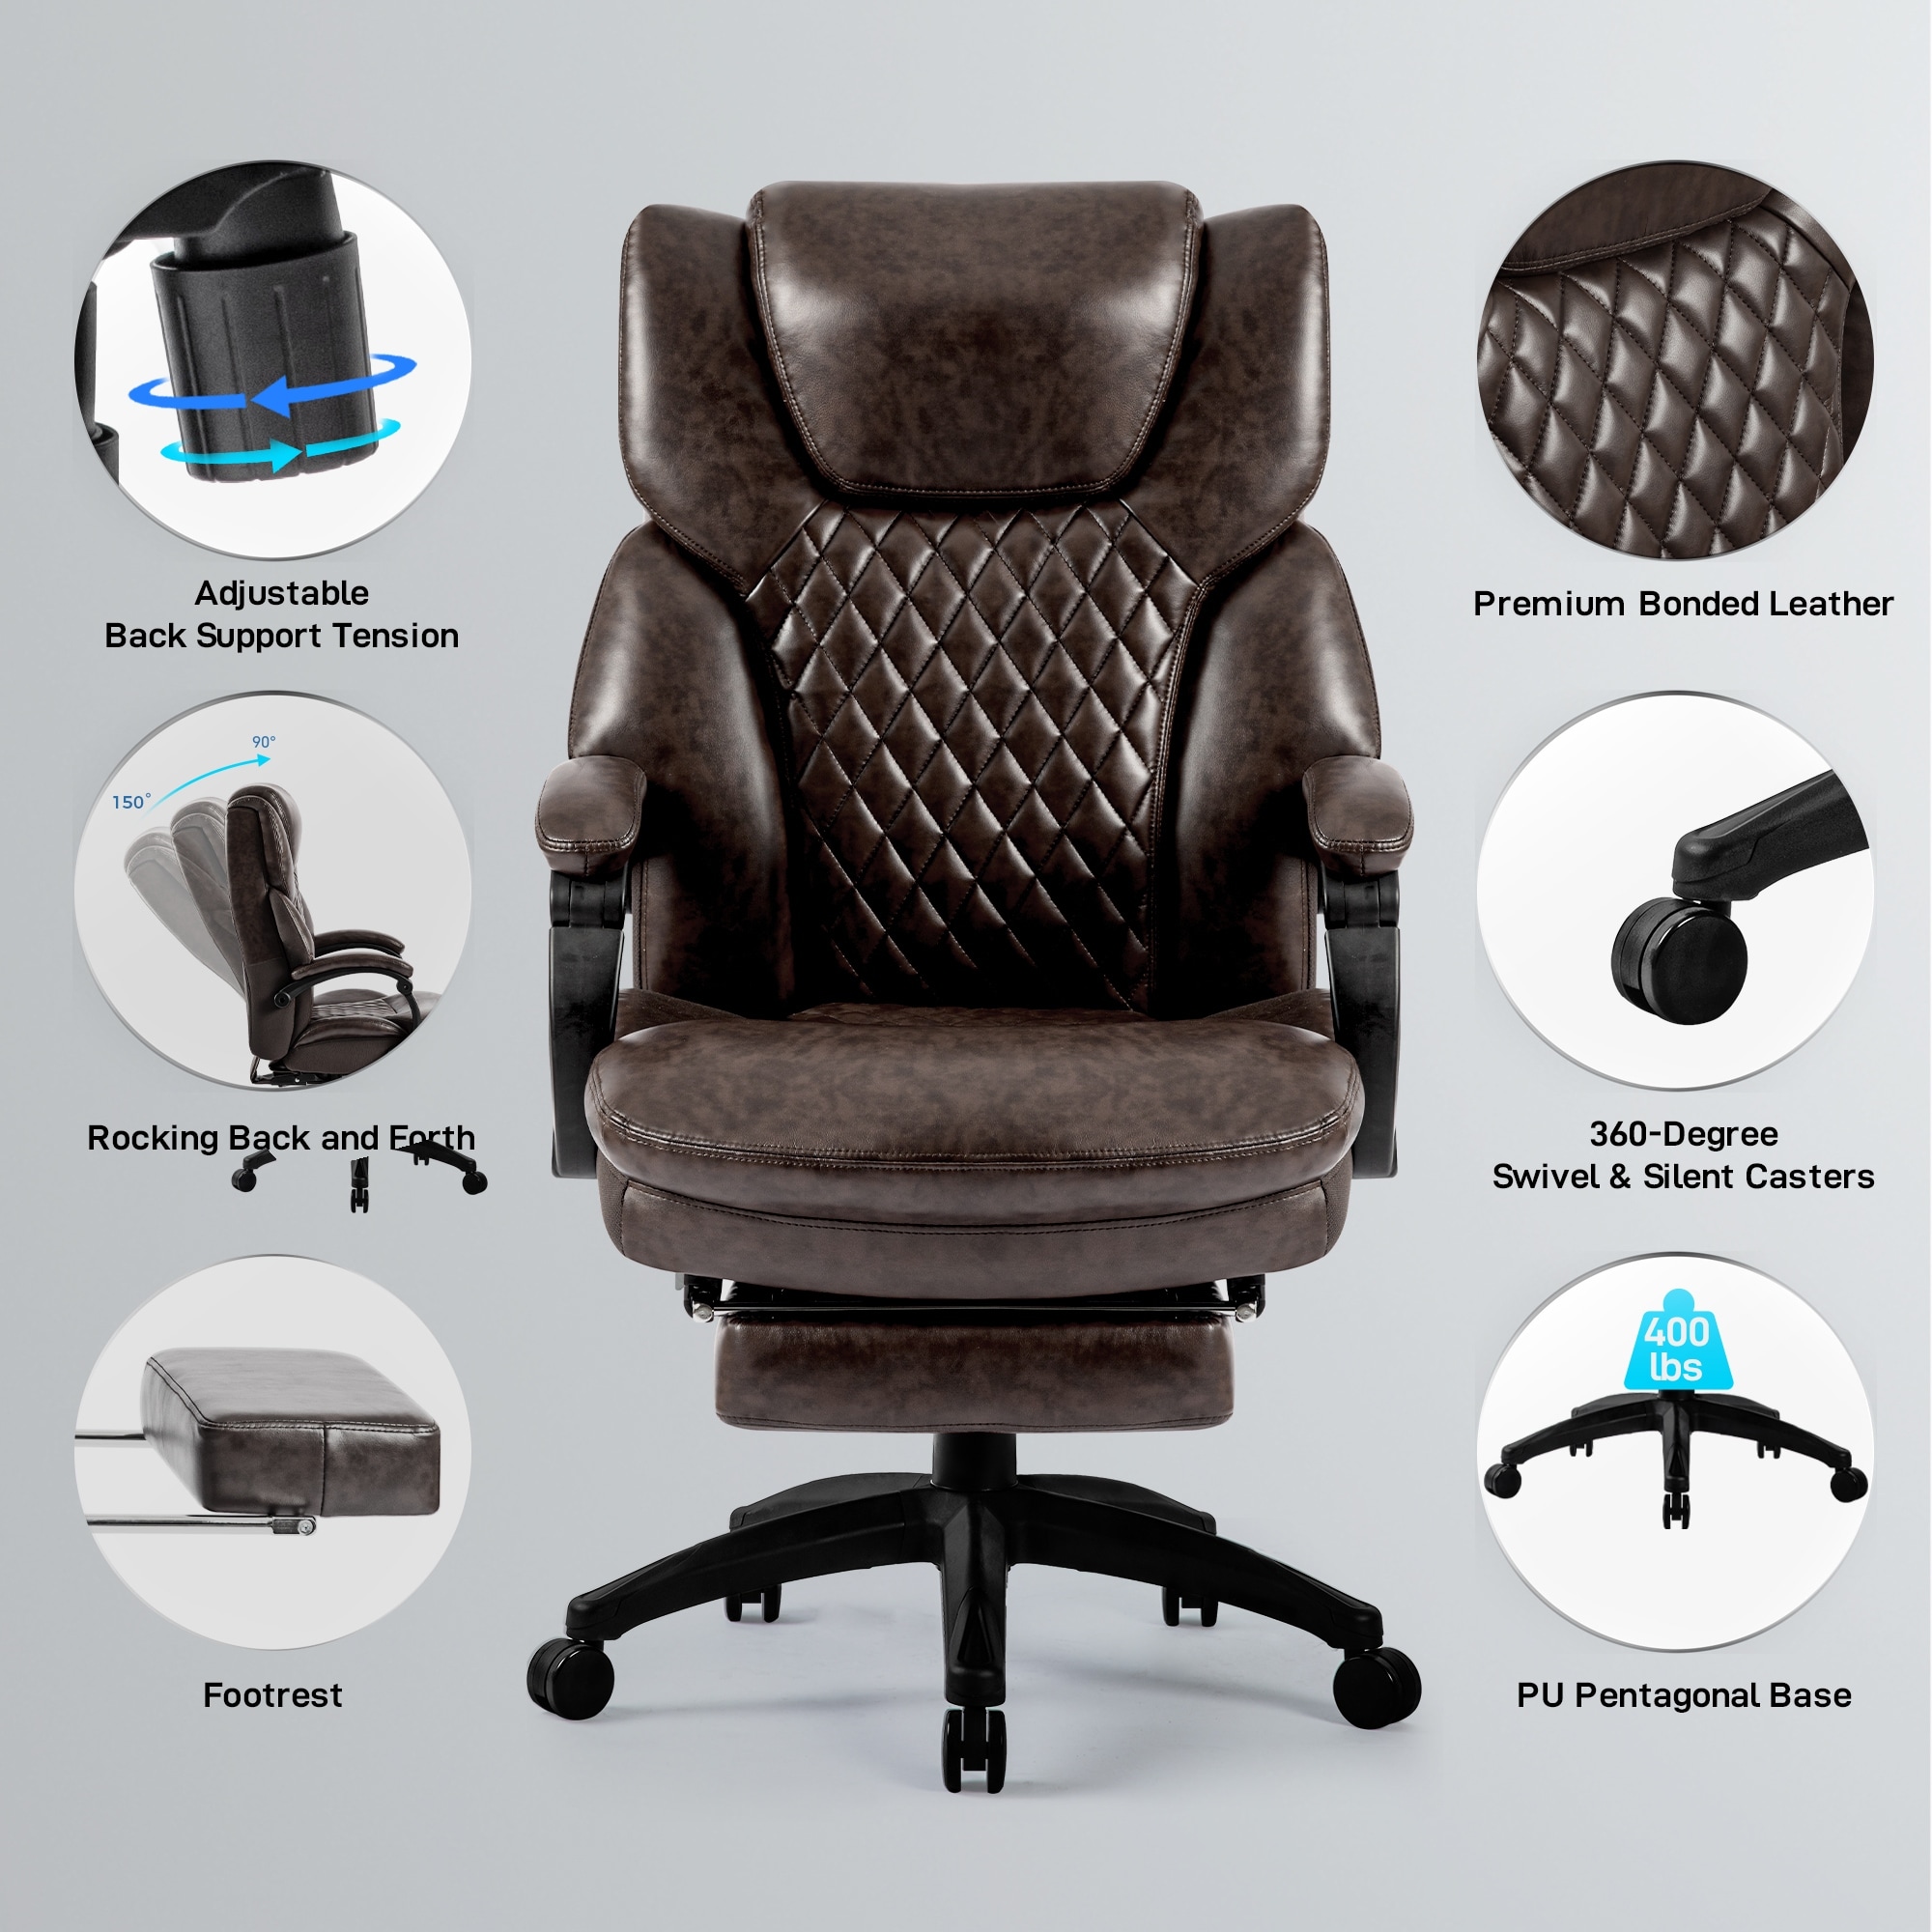 https://ak1.ostkcdn.com/images/products/is/images/direct/b24a23cbdbe449251907e7fe649de45b7ededefd/High-Back-Big-%26-Tall-400lb-Office-Chair-with-Footrest-Bonded-Leather-Ergonomic-Executive-Desk-Computer-Swivel-Chair.jpg